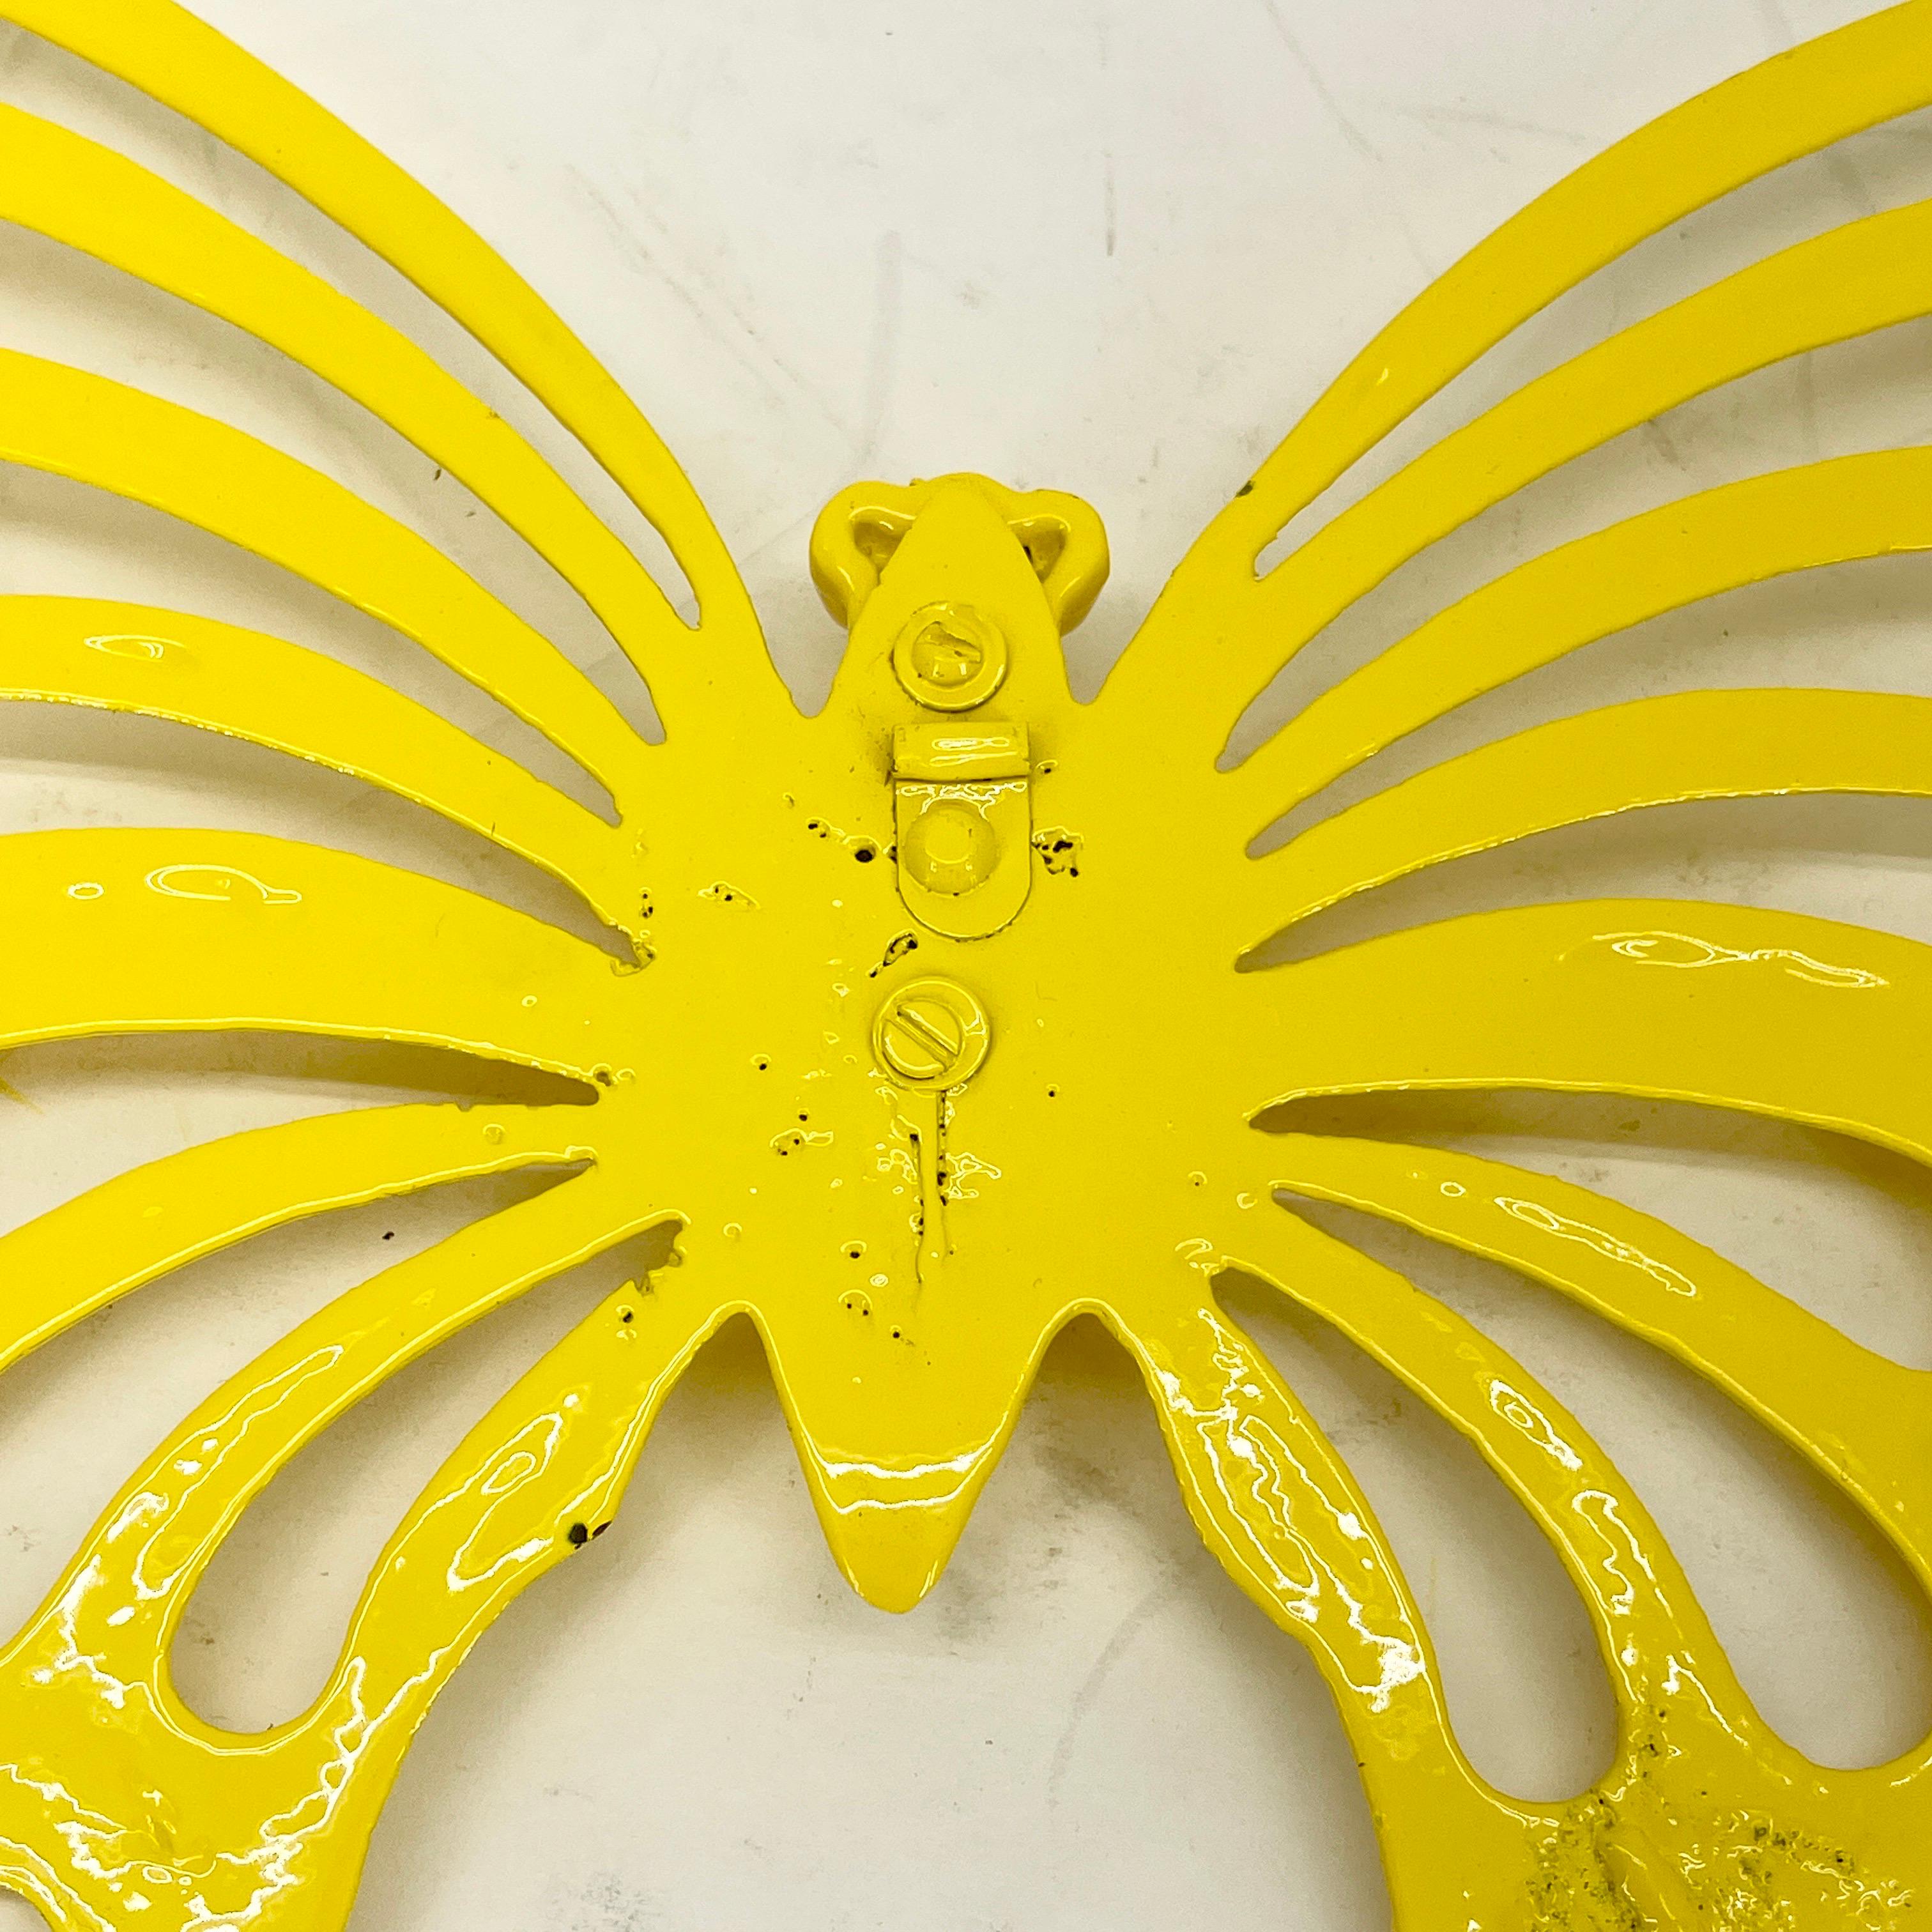 Large Brass Midcentury Butterfly Sculpture in Bright Yellow Powder-Coat For Sale 5